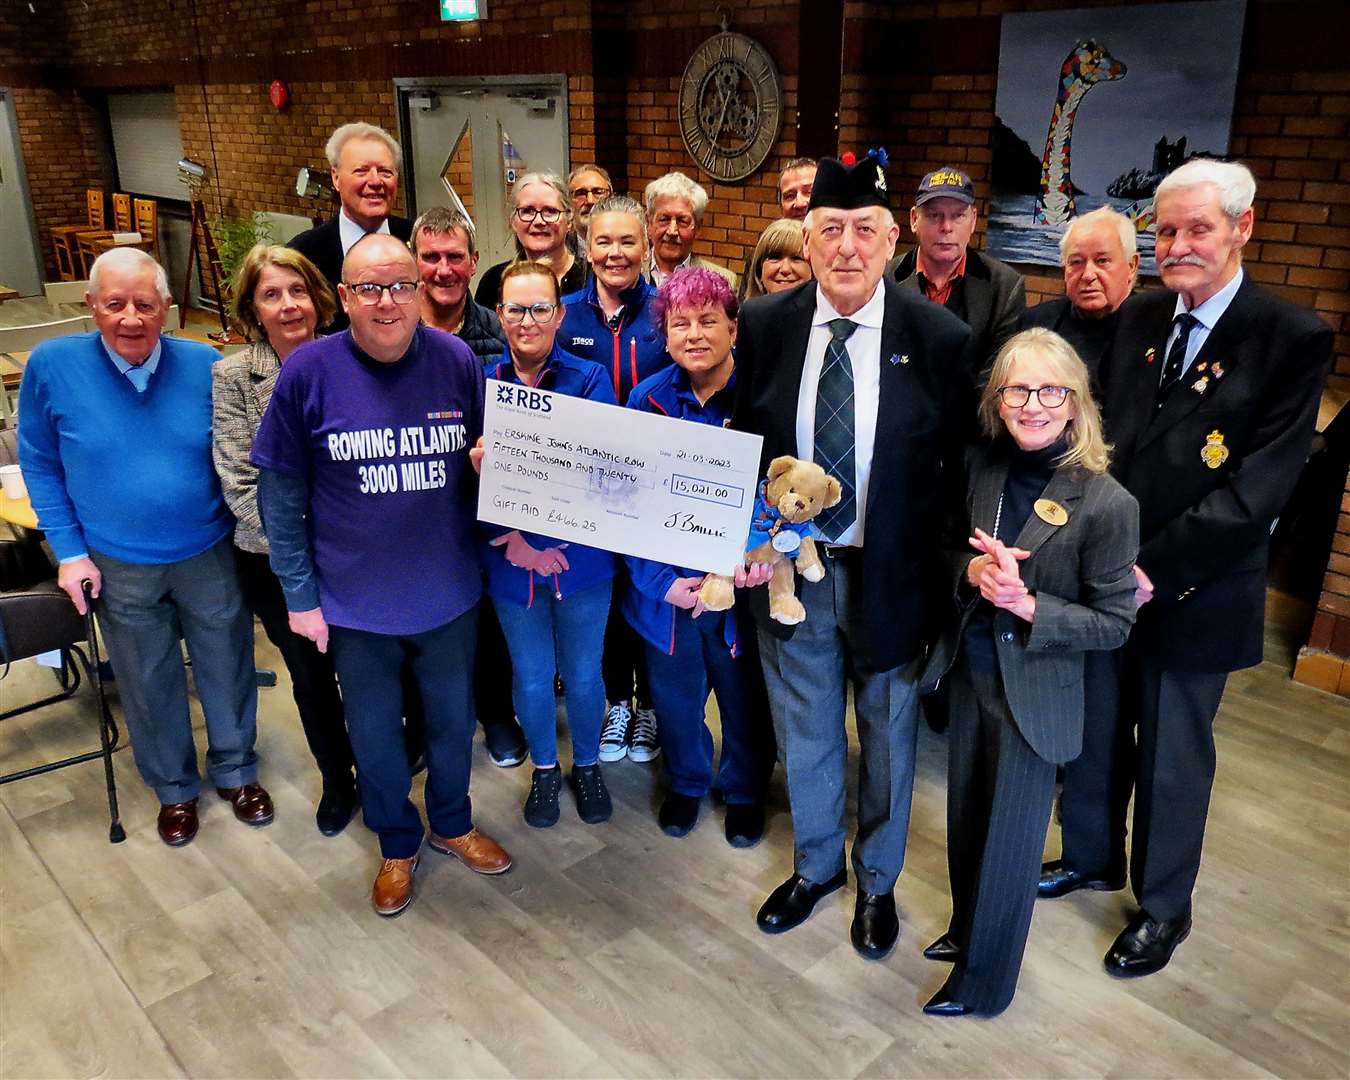 Johnnie Baillie presents a symbolic cheque for £15,021 to Erskine Hospital fundraiser Jim Watret, in the company of Inverness Provost Glynis Campbell-Sinclair, veterans, donors and members of Tesco staff who helped him in his Atlantic row.